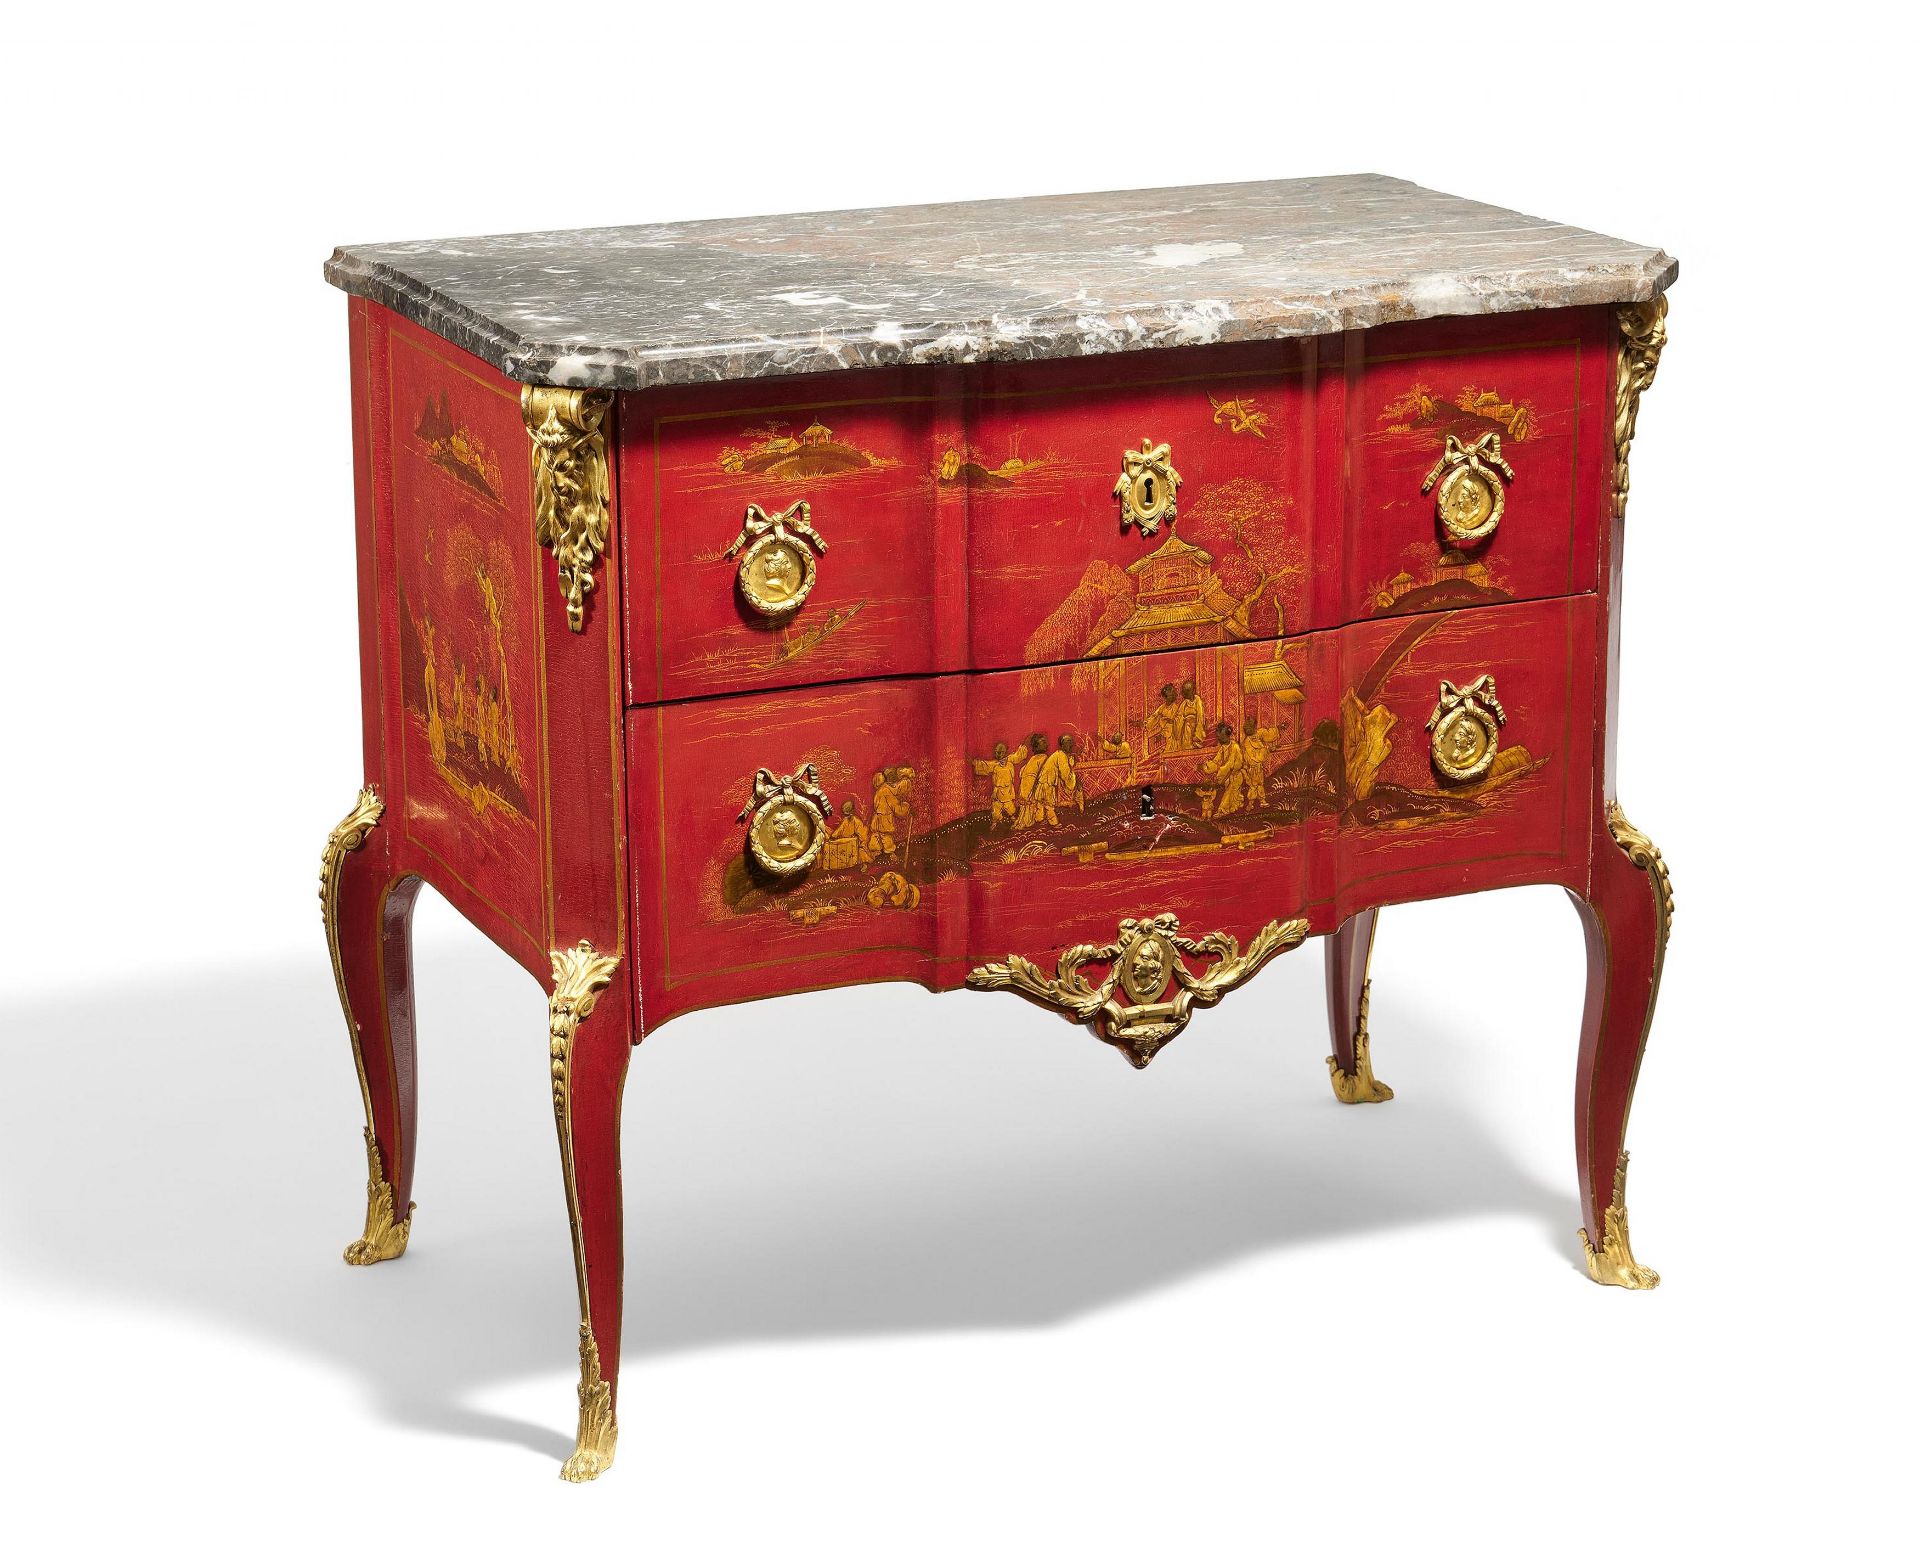 France: COMMODE STYLE TRANSITION WITH CHINOISE SERIES